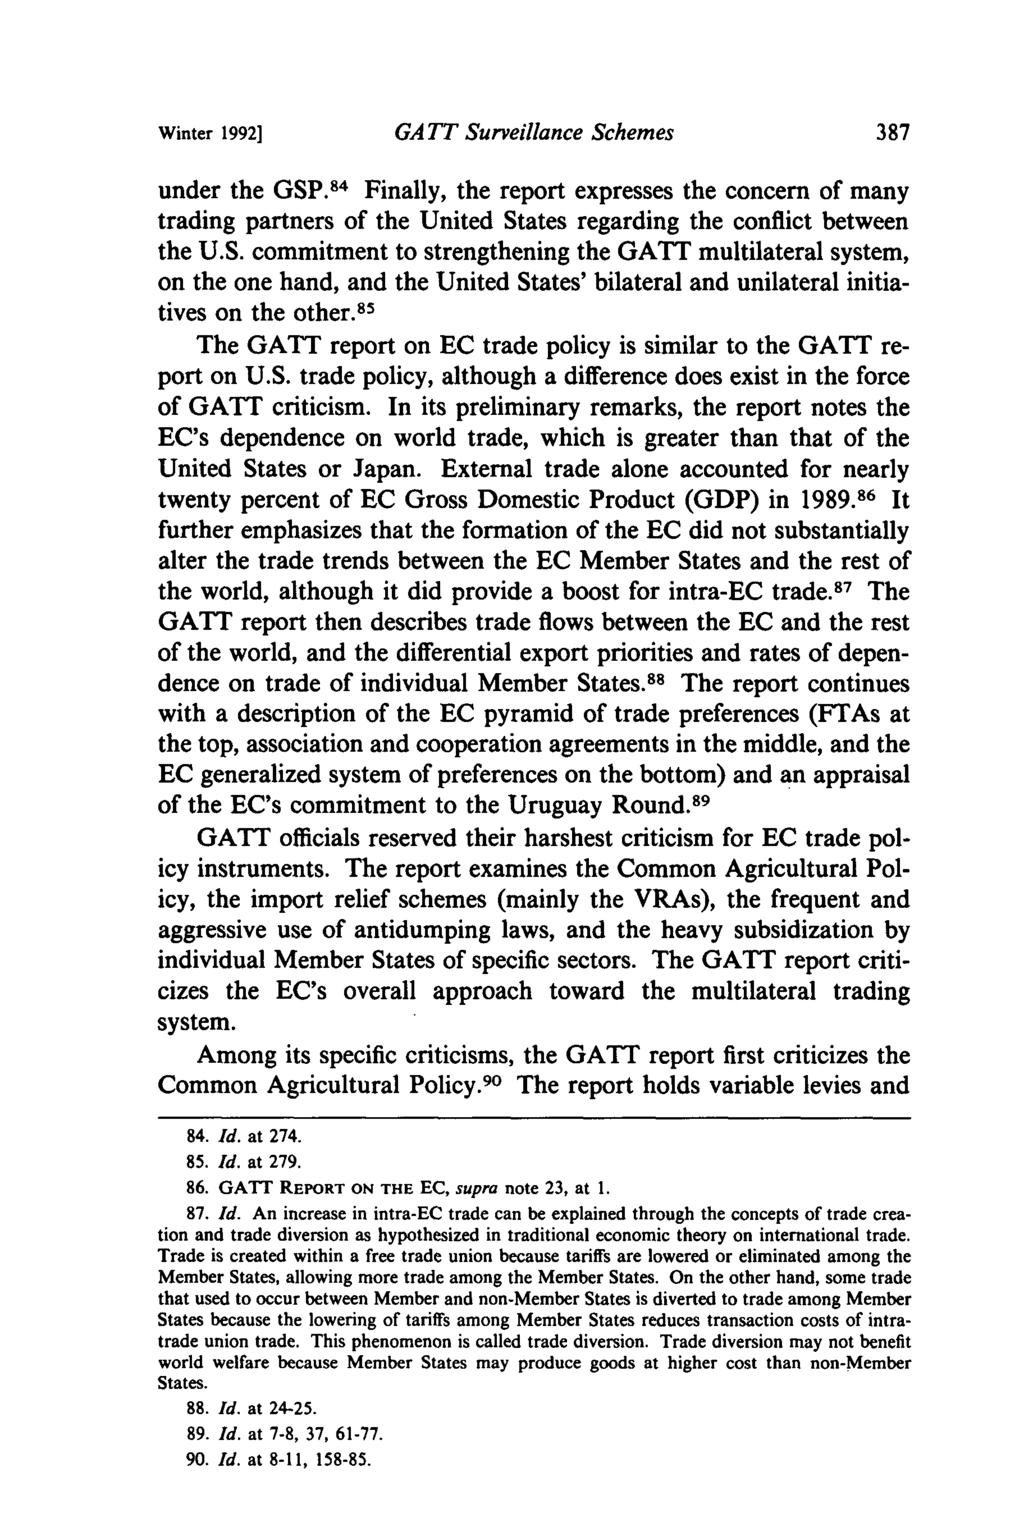 Winter 1992] GA TT Surveillance Schemes under the GSP. 84 Finally, the report expresses the concern of many trading partners of the United States regarding the conflict between the U.S. commitment to strengthening the GATT multilateral system, on the one hand, and the United States' bilateral and unilateral initiatives on the other.